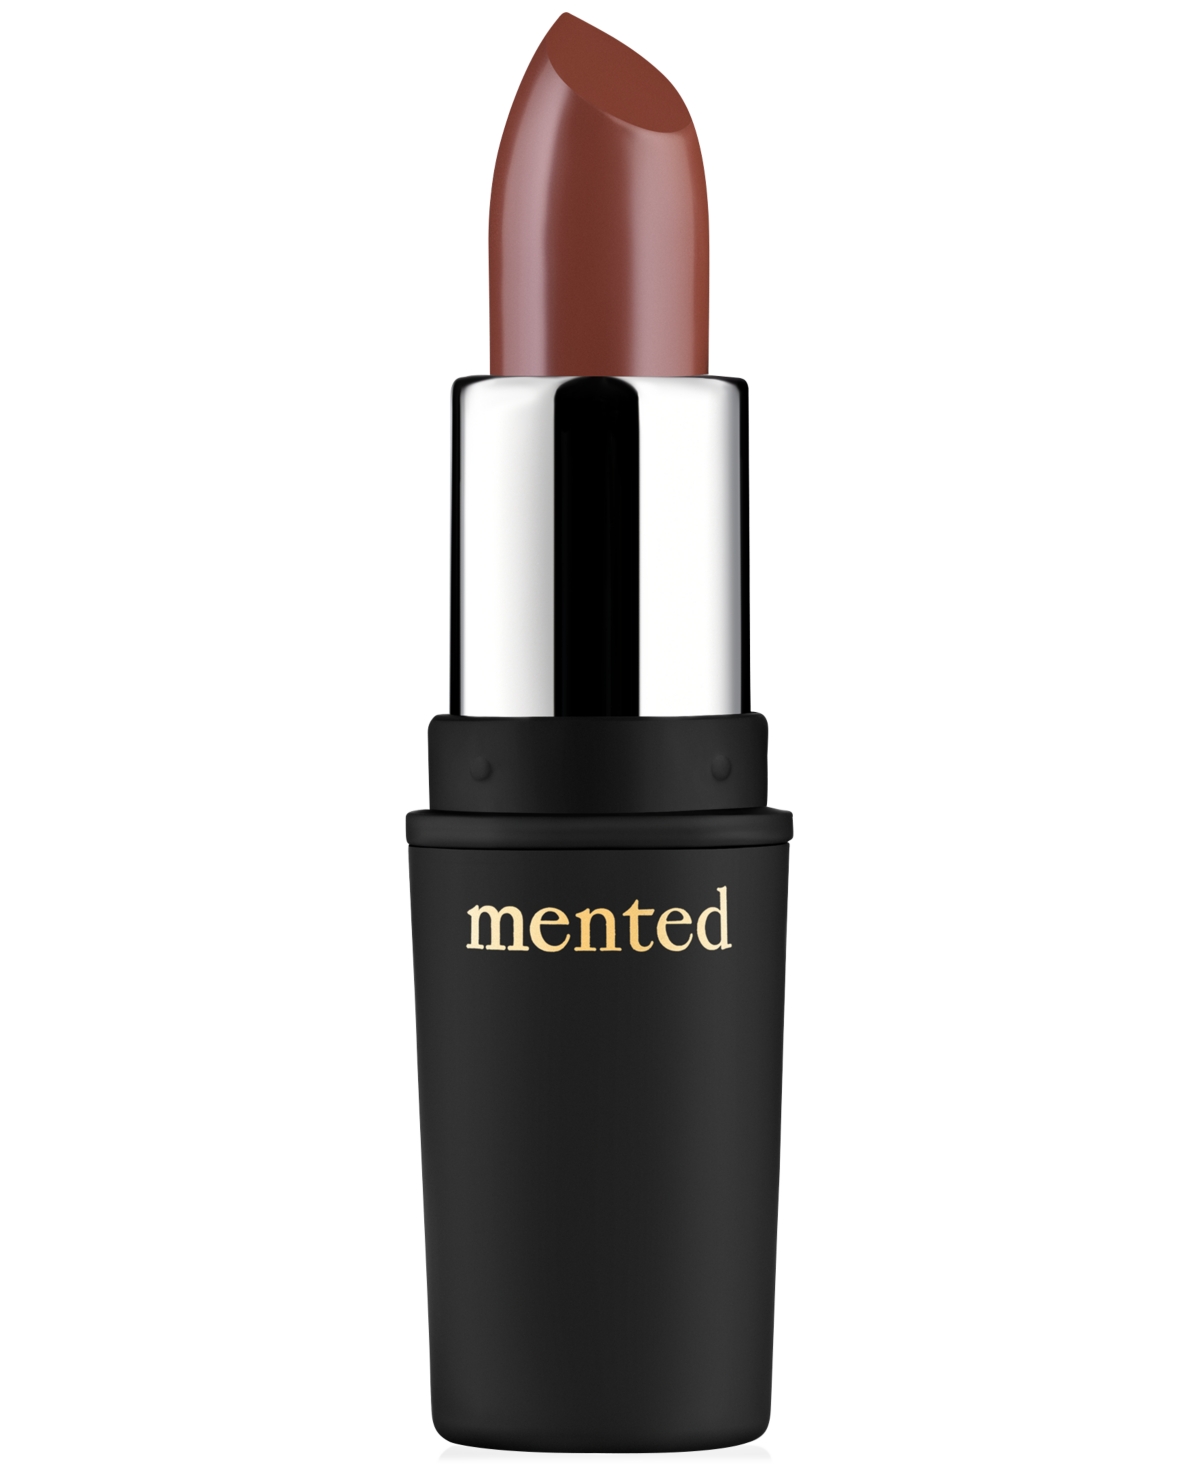 Mented Cosmetics Semi-matte Lipstick In Brown Bare- Medium Brown With Hint Of Pi